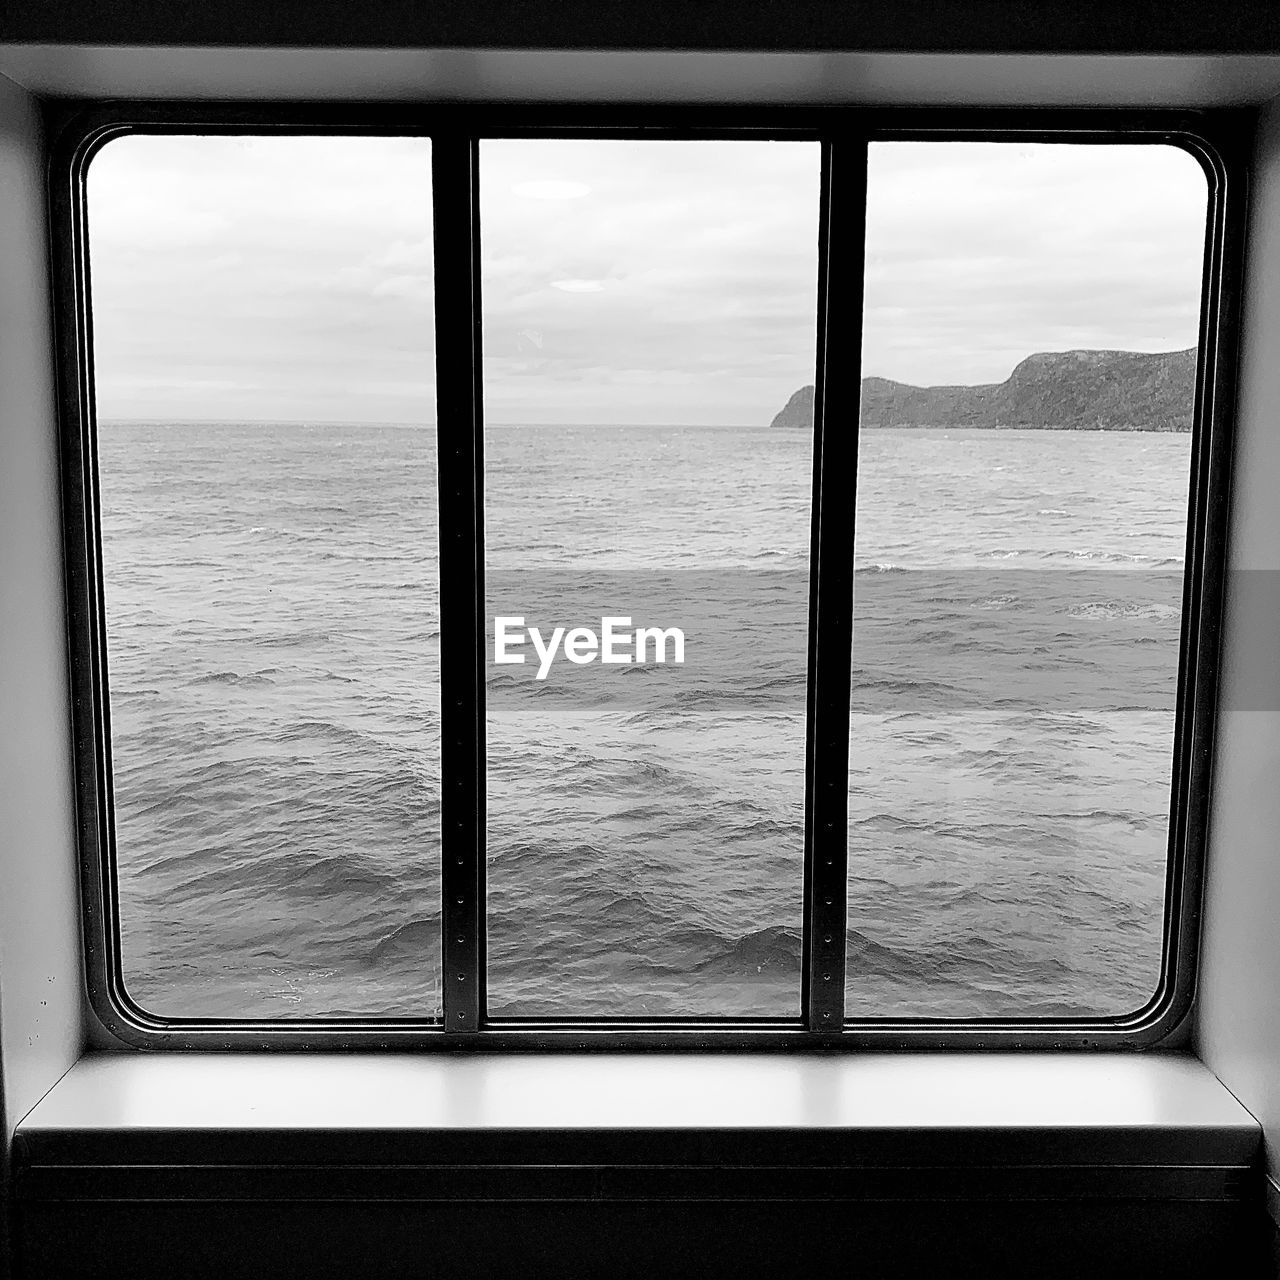 window, black, sea, water, sky, black and white, white, nature, transportation, no people, mode of transportation, travel, scenics - nature, monochrome photography, day, light, glass, cloud, monochrome, transparent, horizon, outdoors, architecture, beauty in nature, horizon over water, interior design, tranquility, vehicle interior, land, looking through window